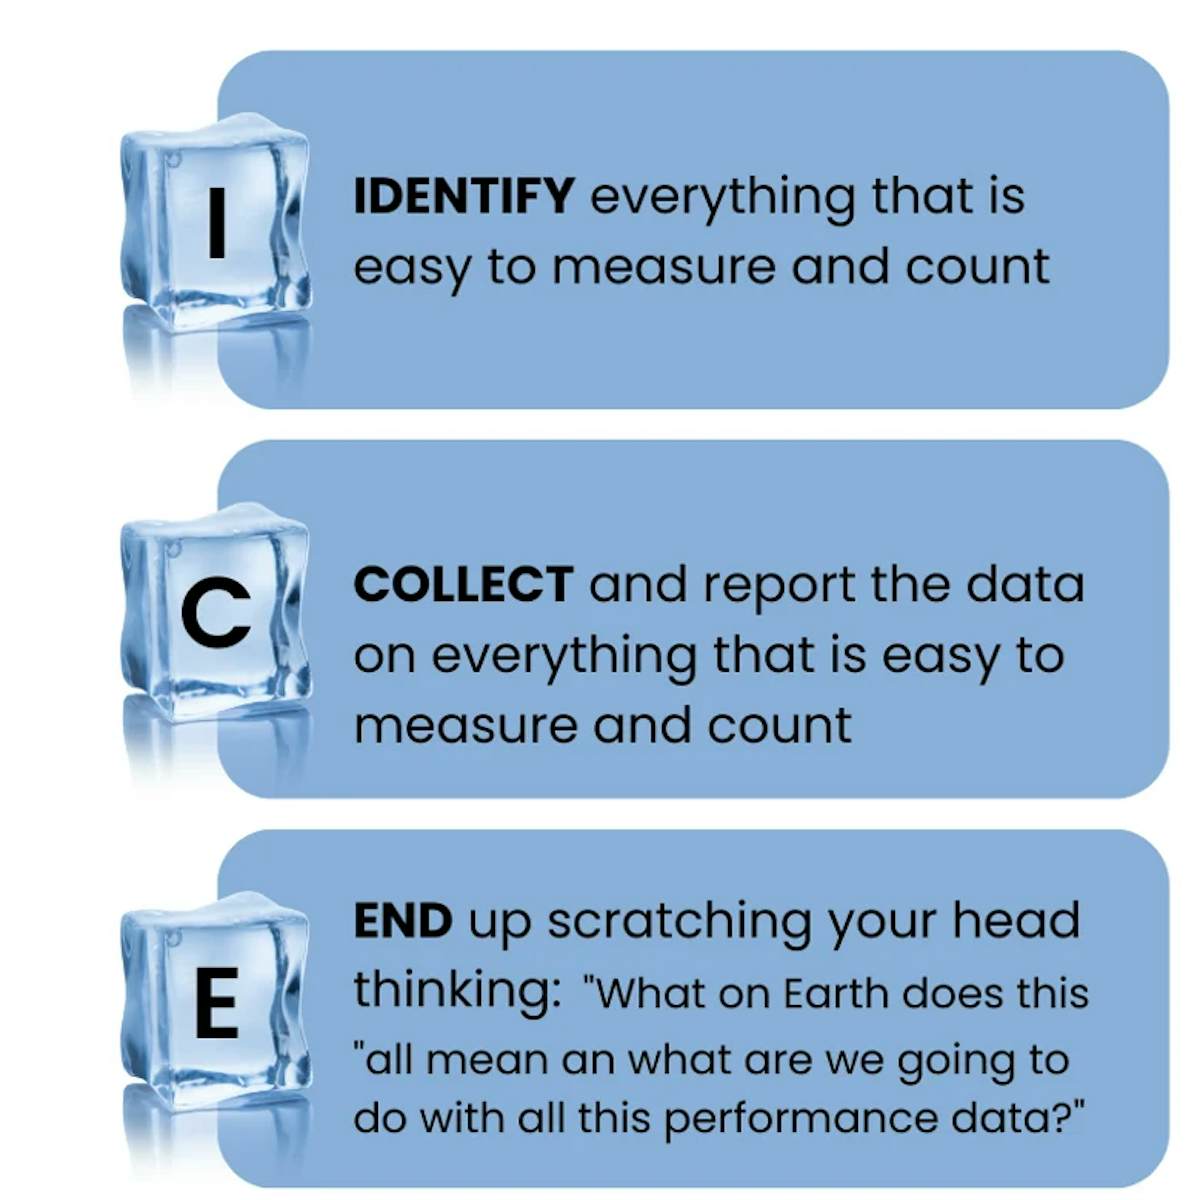 ICE: identify, collect, end